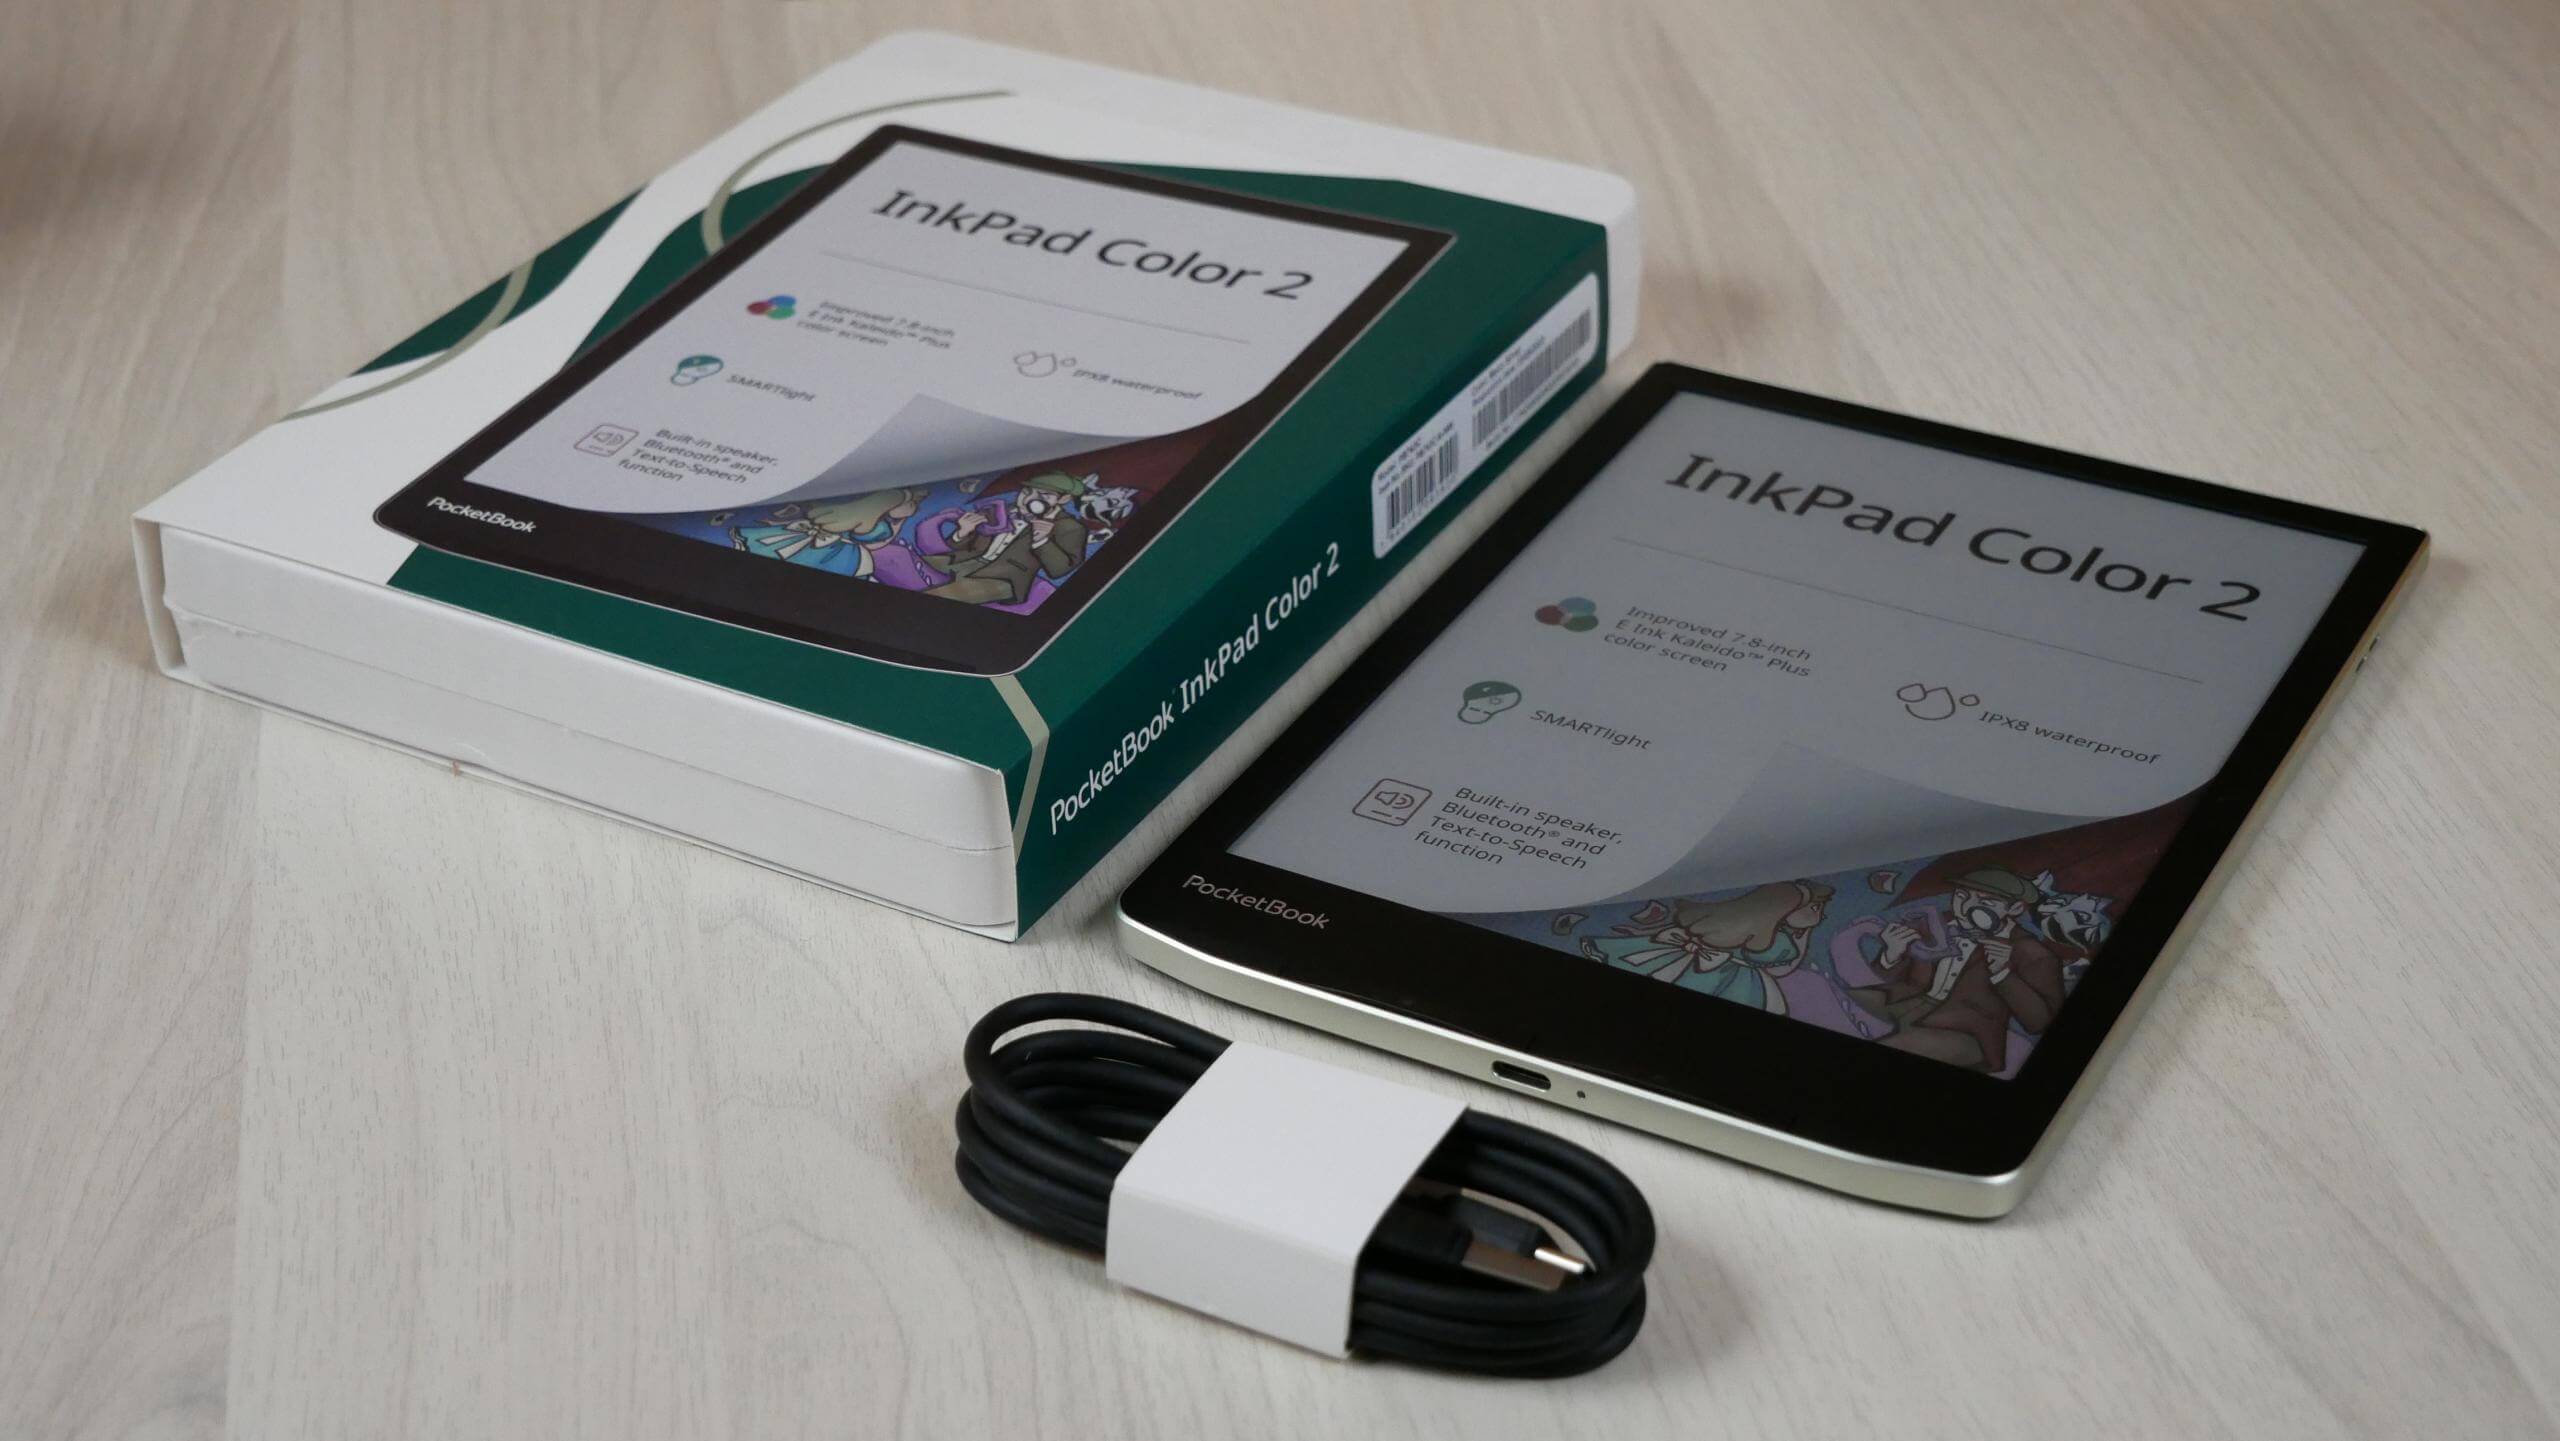 The Latest Color EINK 2023  Pocketbook Inkpad Color 2 Unboxing 